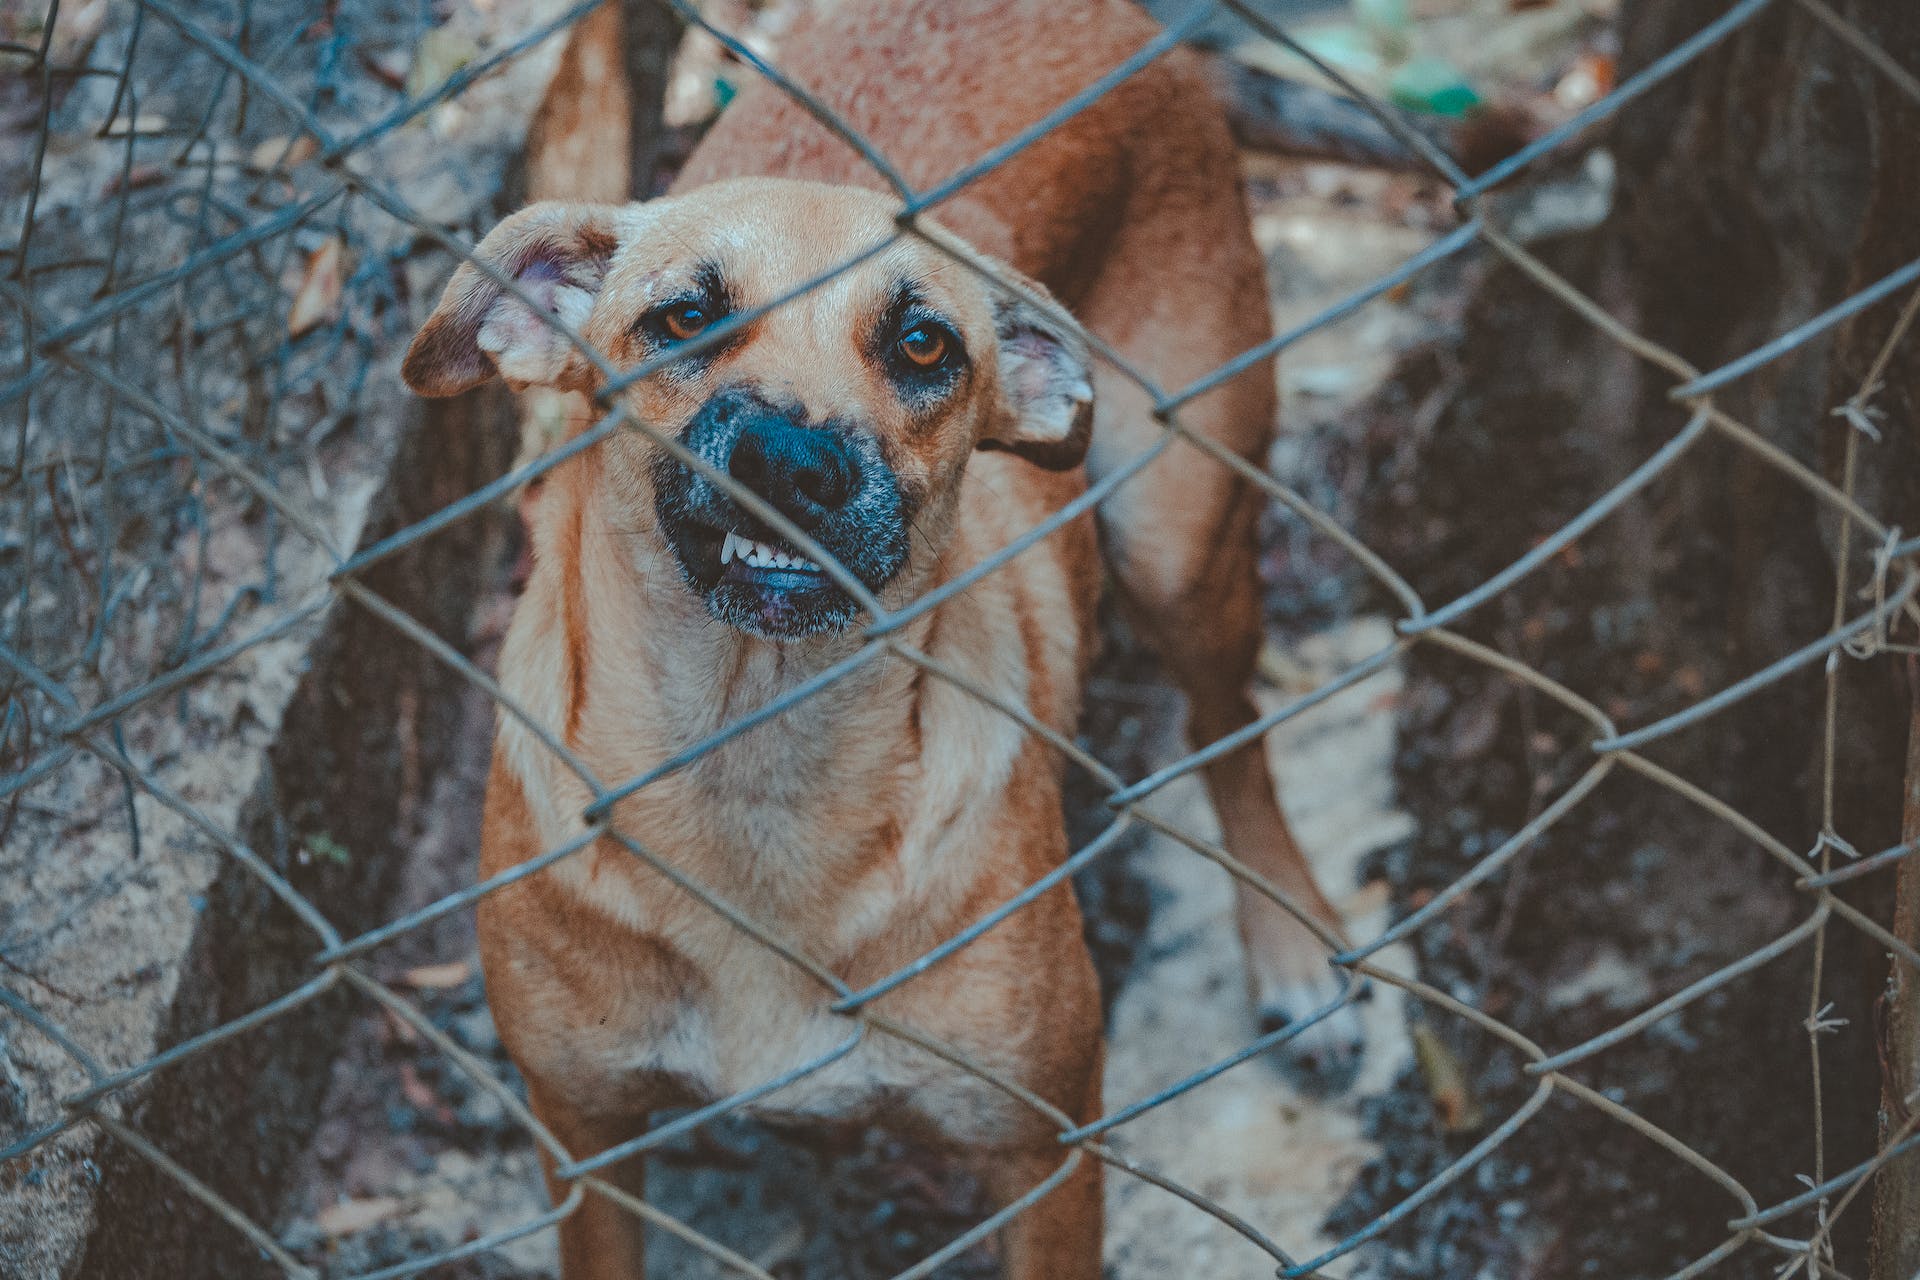 A dog standing behind a wire fence